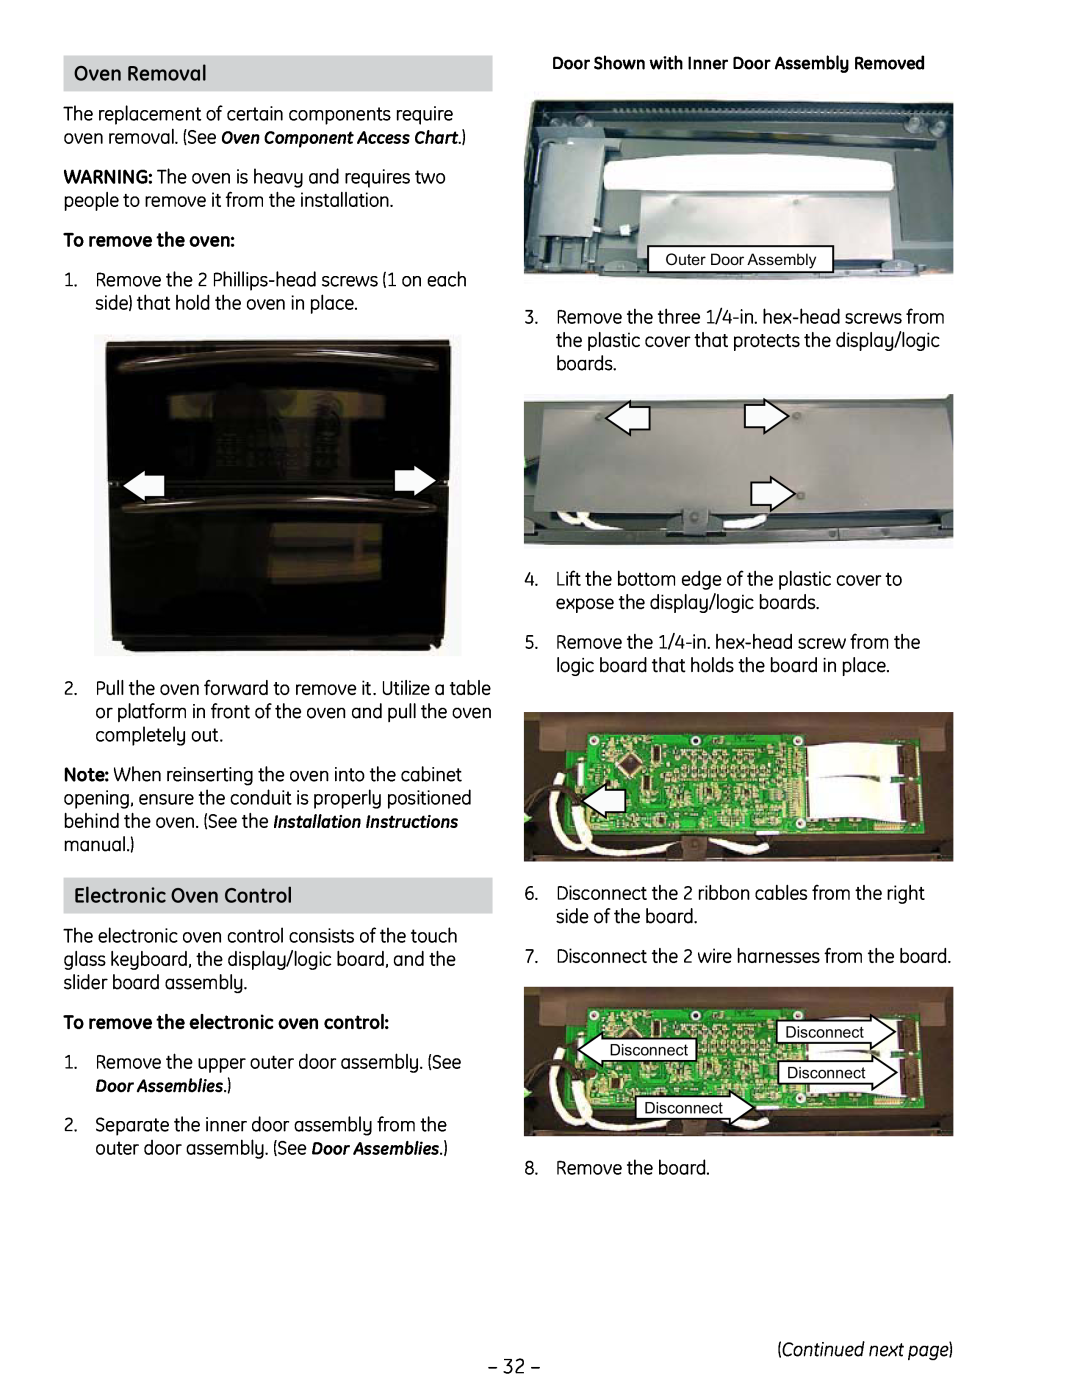 GE PT925 manual Oven Removal, Electronic Oven Control, To remove the oven, To remove the electronic oven control 